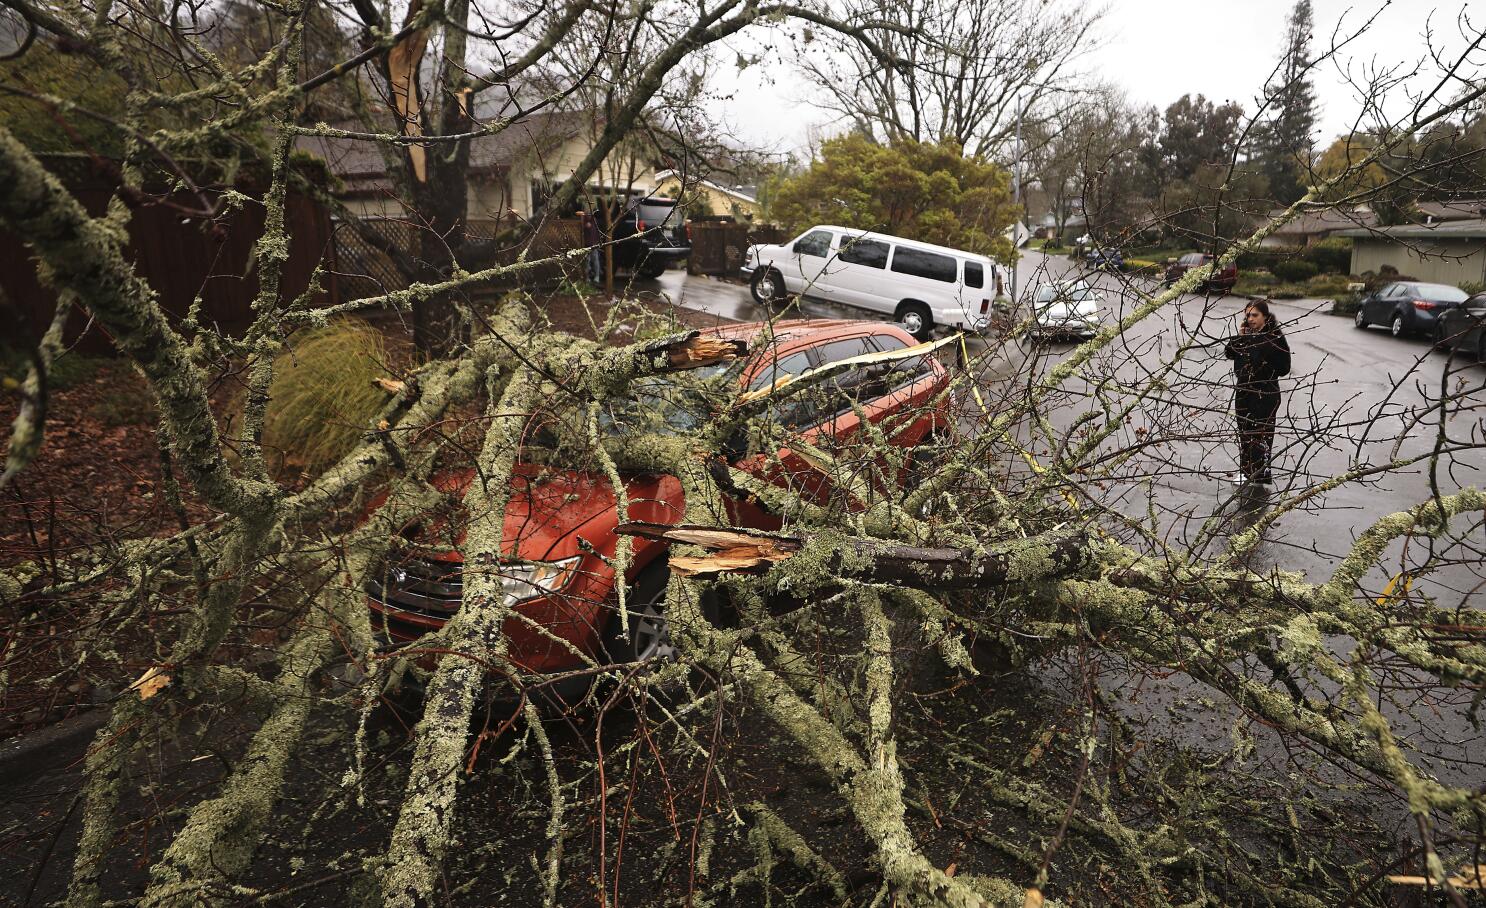 Storm Video: Trees falling due to high winds across the region